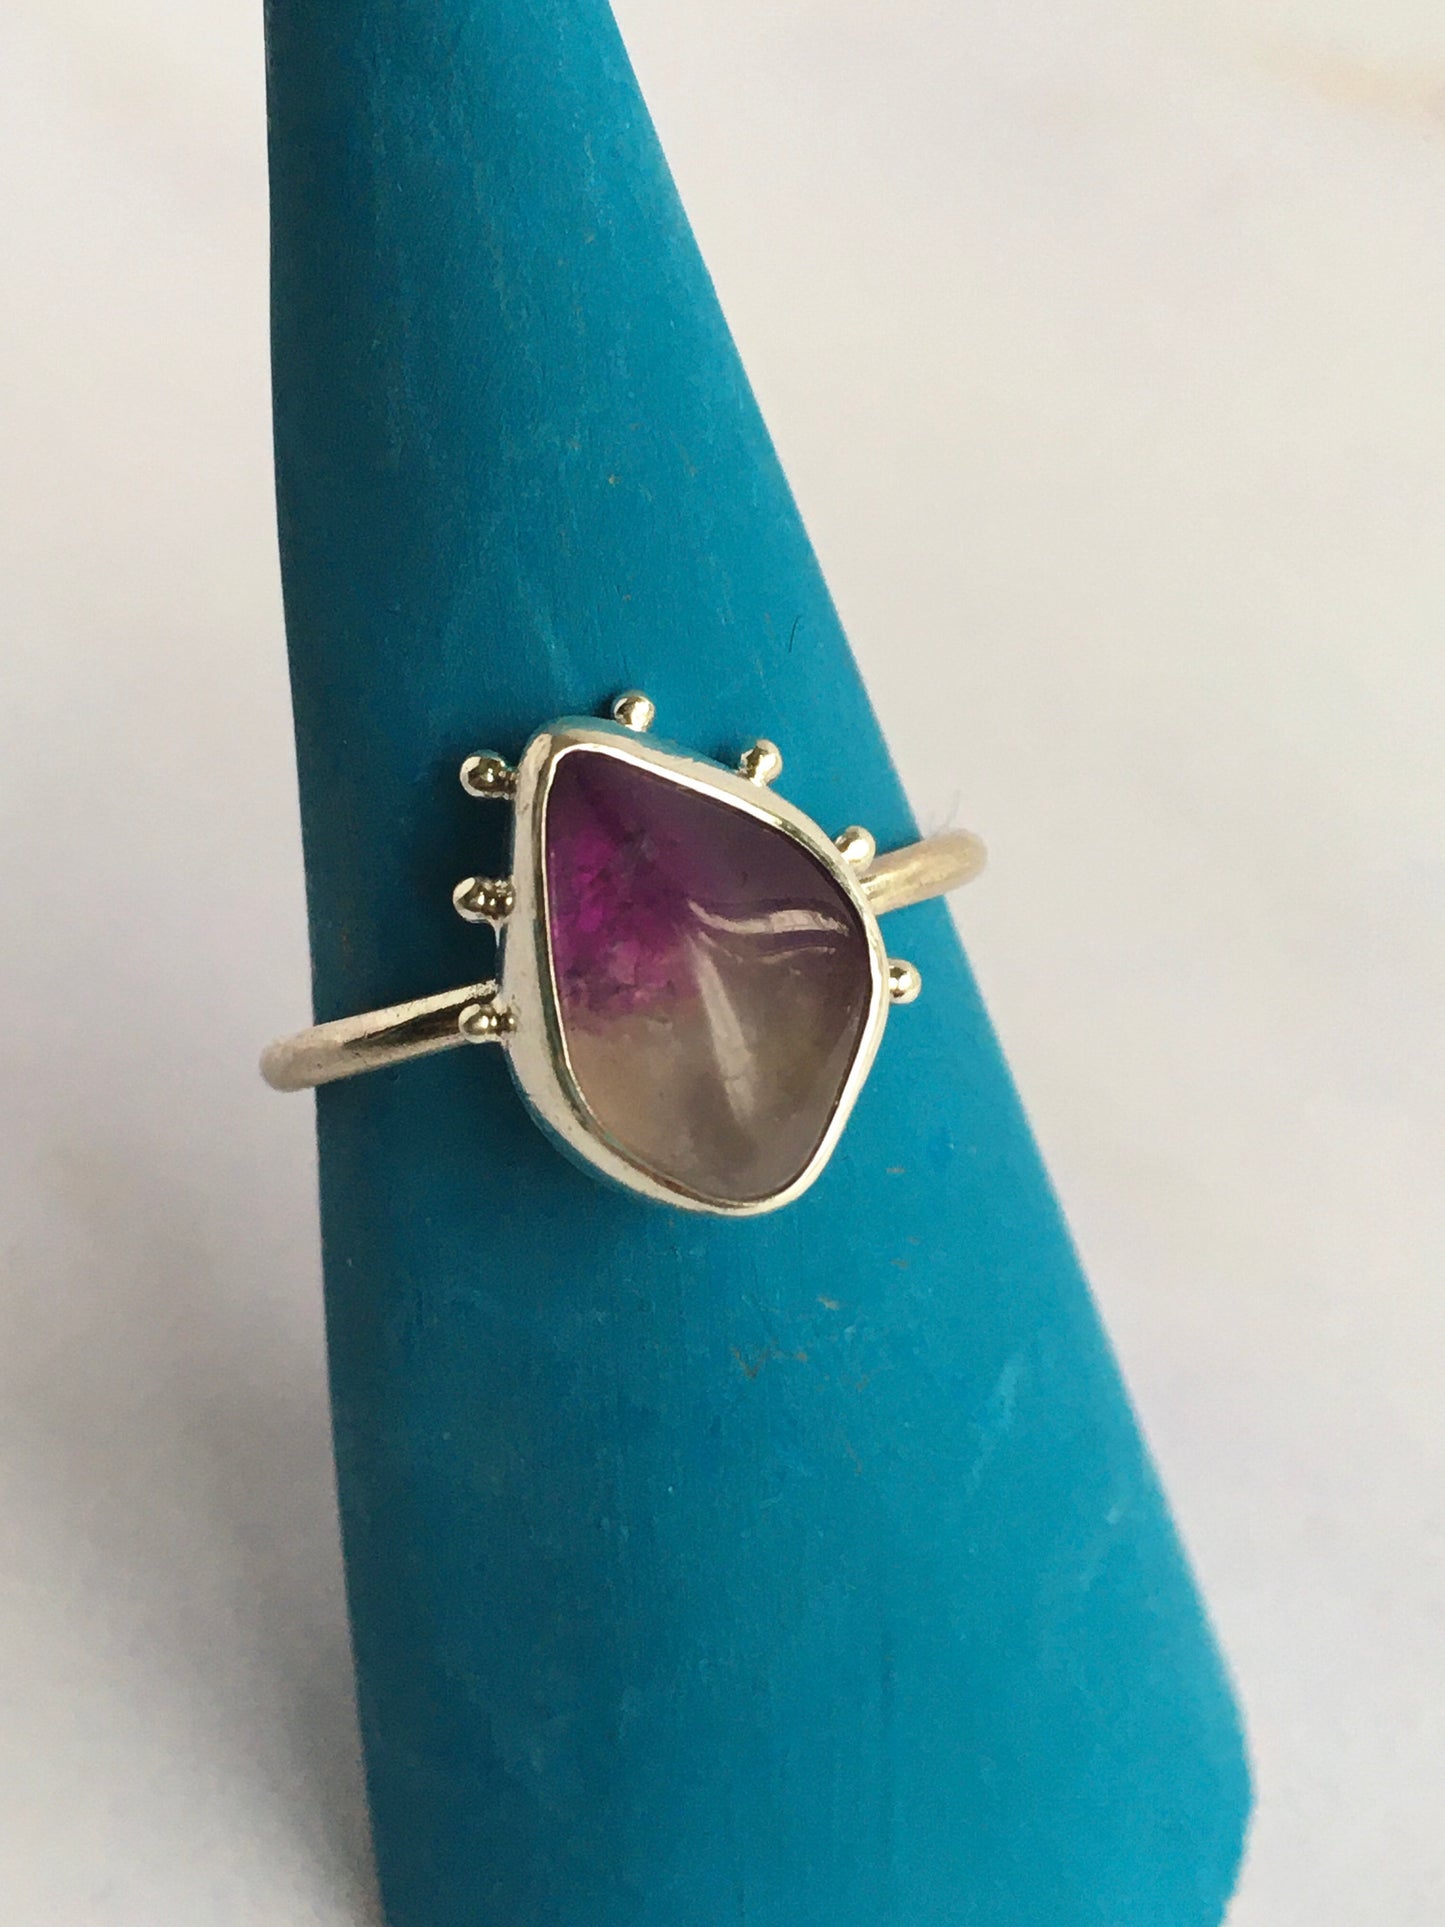 Purple Haze Ring - Amethyst and Sterling Silver Ring with Granulation - UK Size O